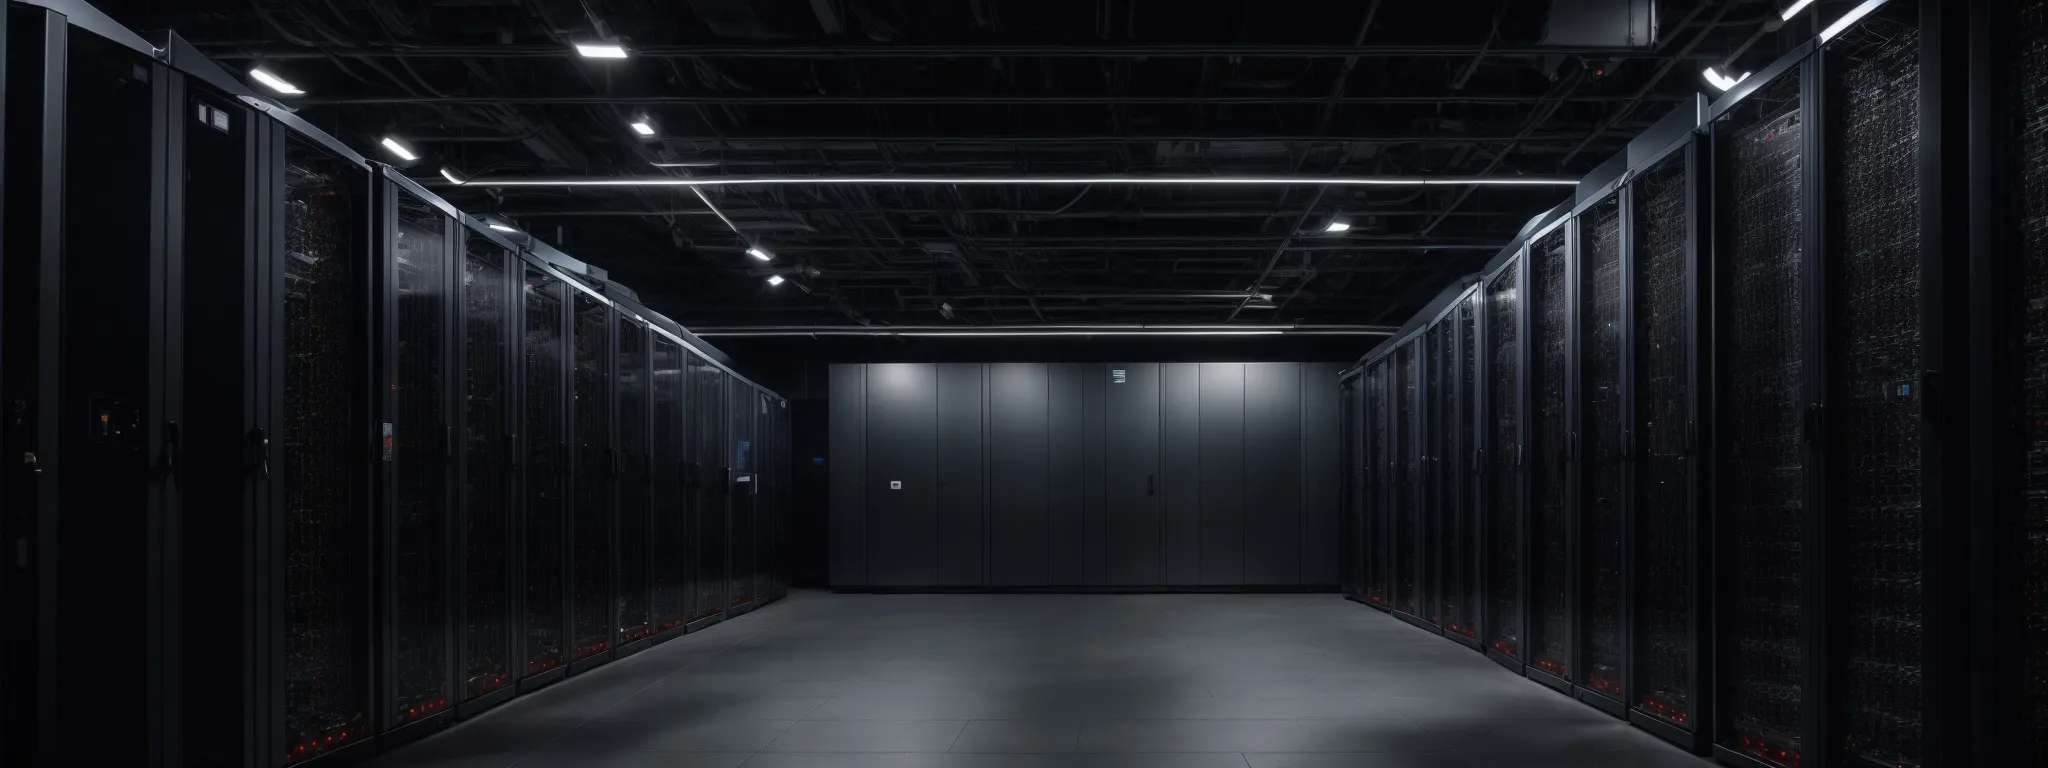 a server room with rows of dedicated servers that emphasize the technical infrastructure for seo optimization on baidu.